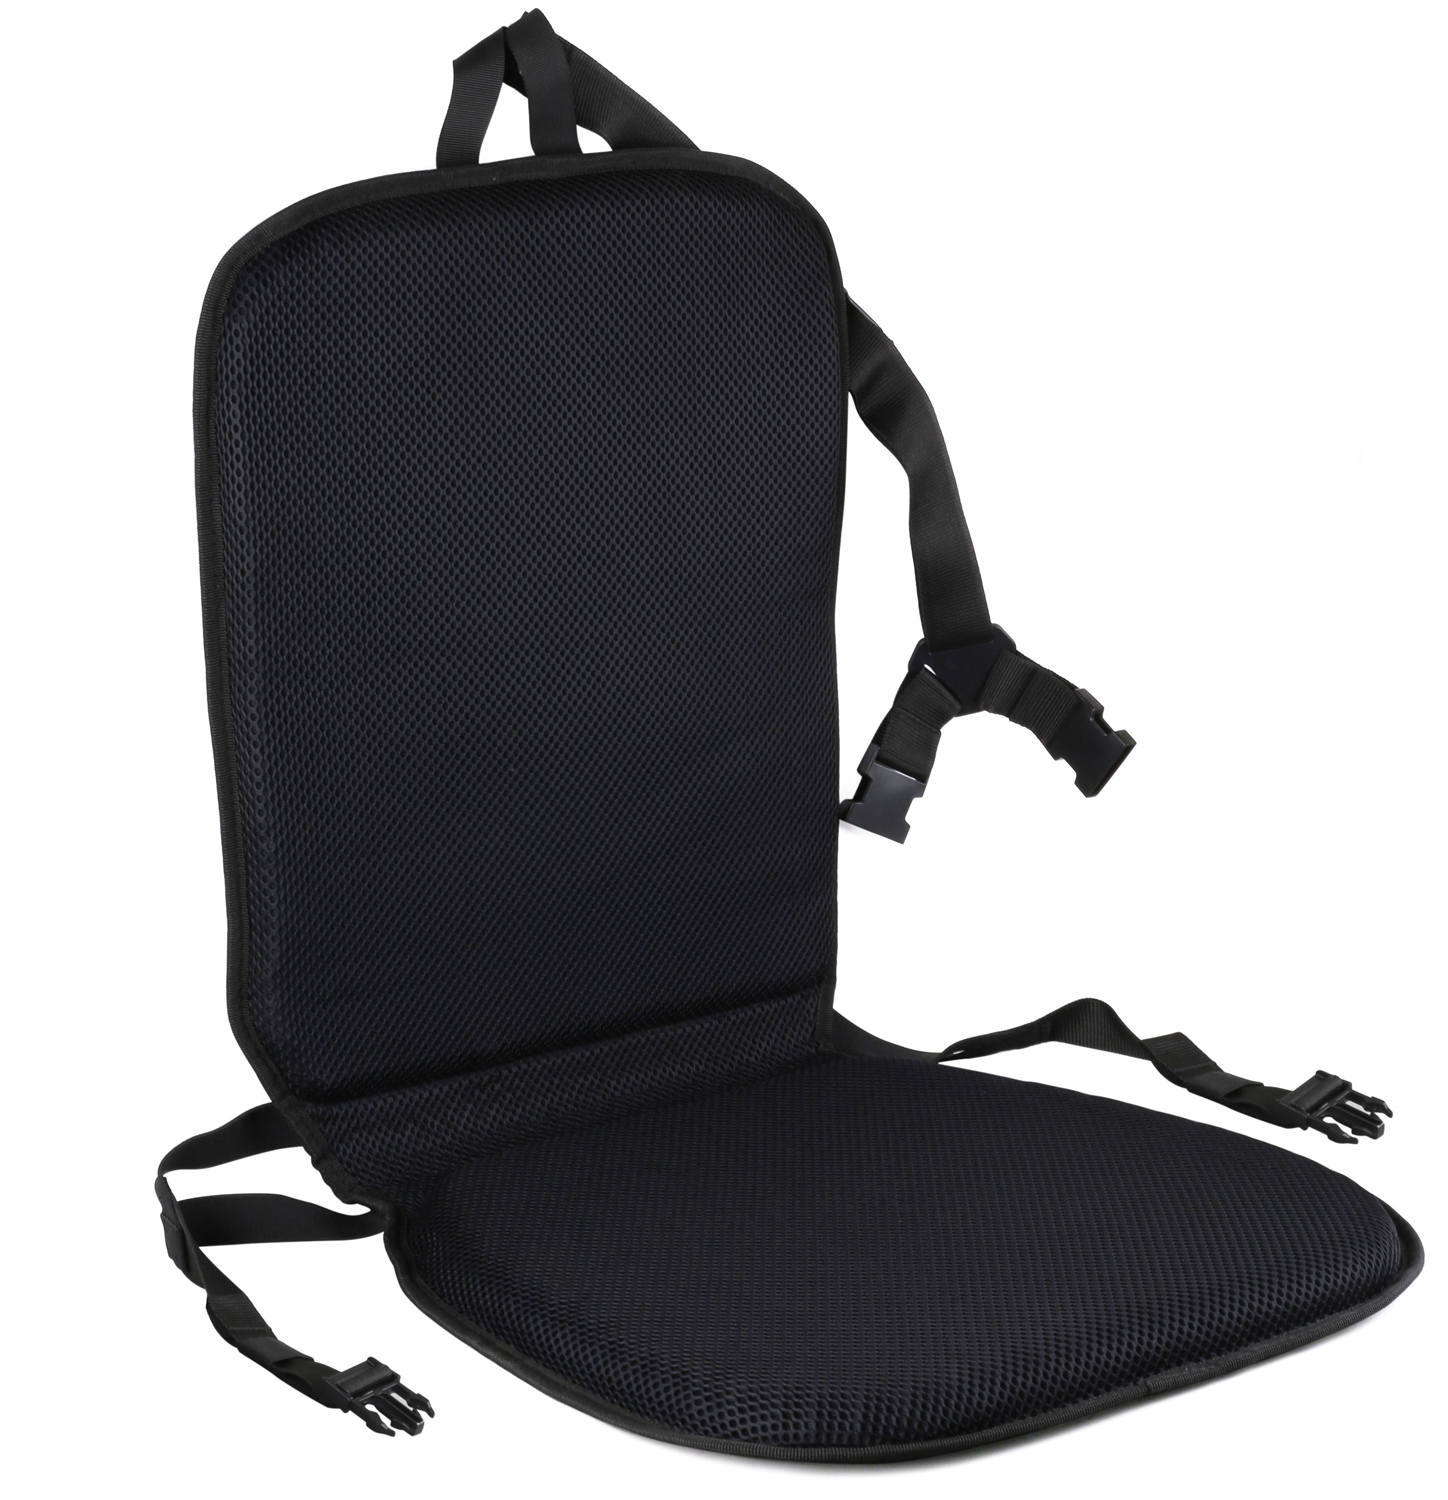 Premium Gel Seat and Back Cushion - FOMI Care | We Bring Relief Naturally